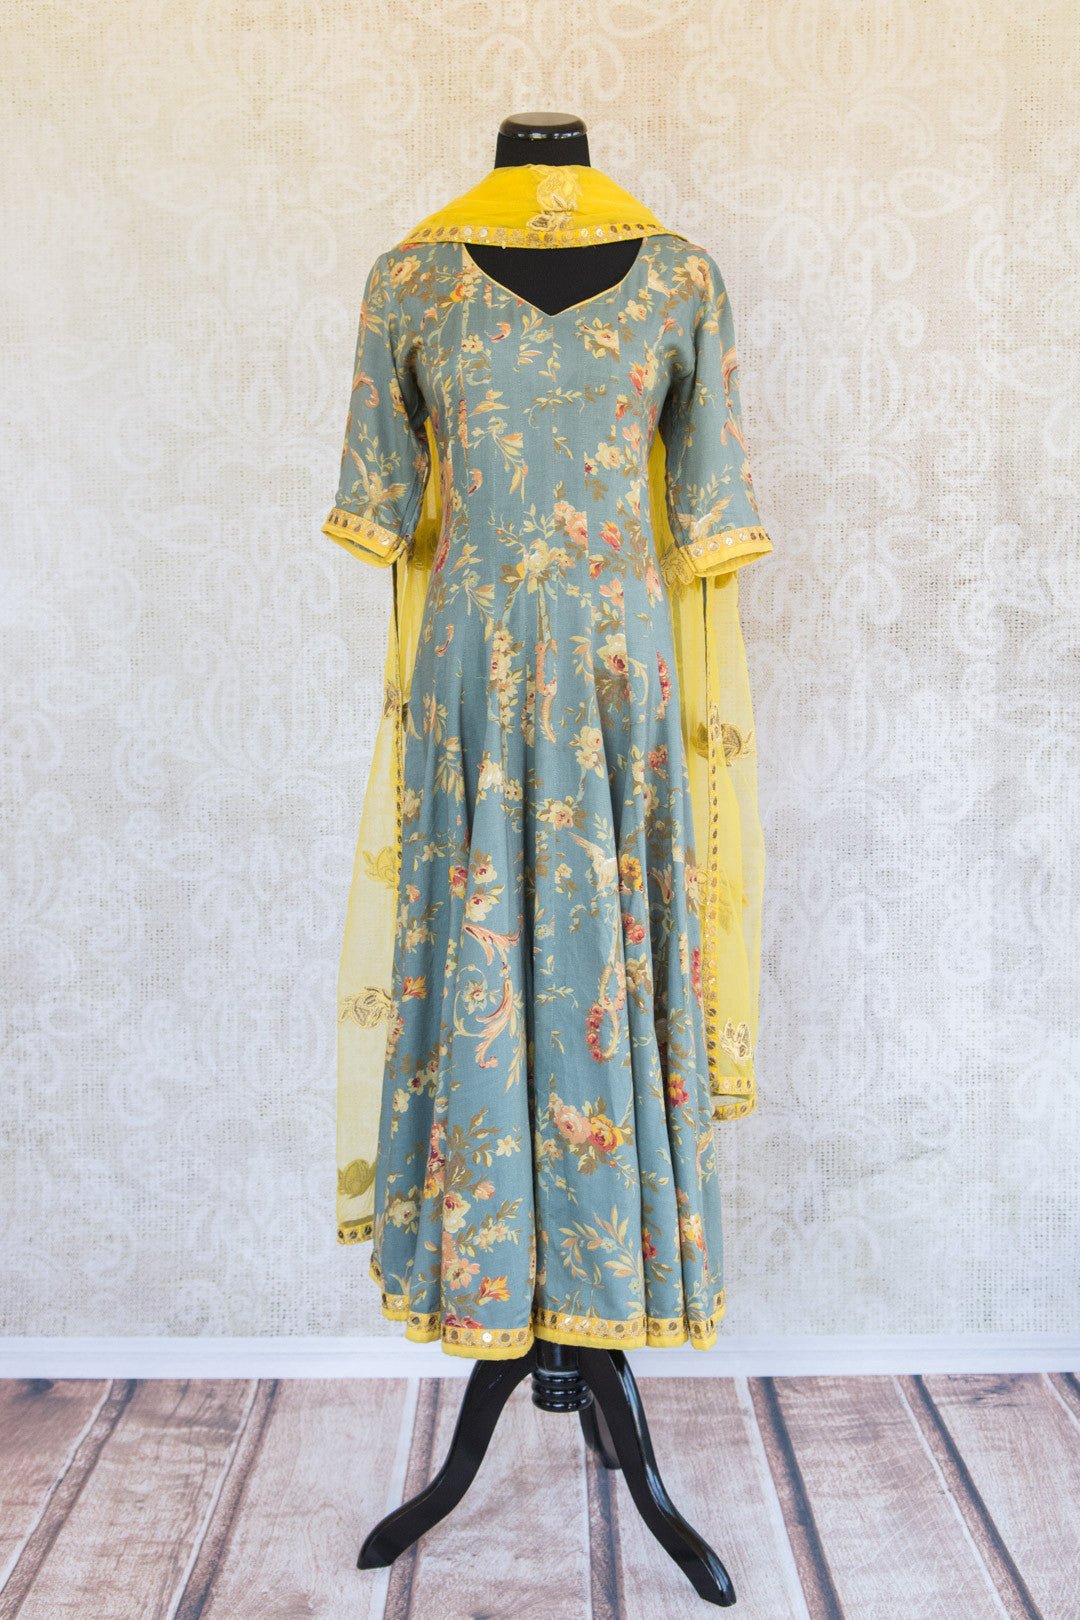 501067-suit-3/4-lenght-sleeve-light-blue-floral-print-gold-yellow-accent